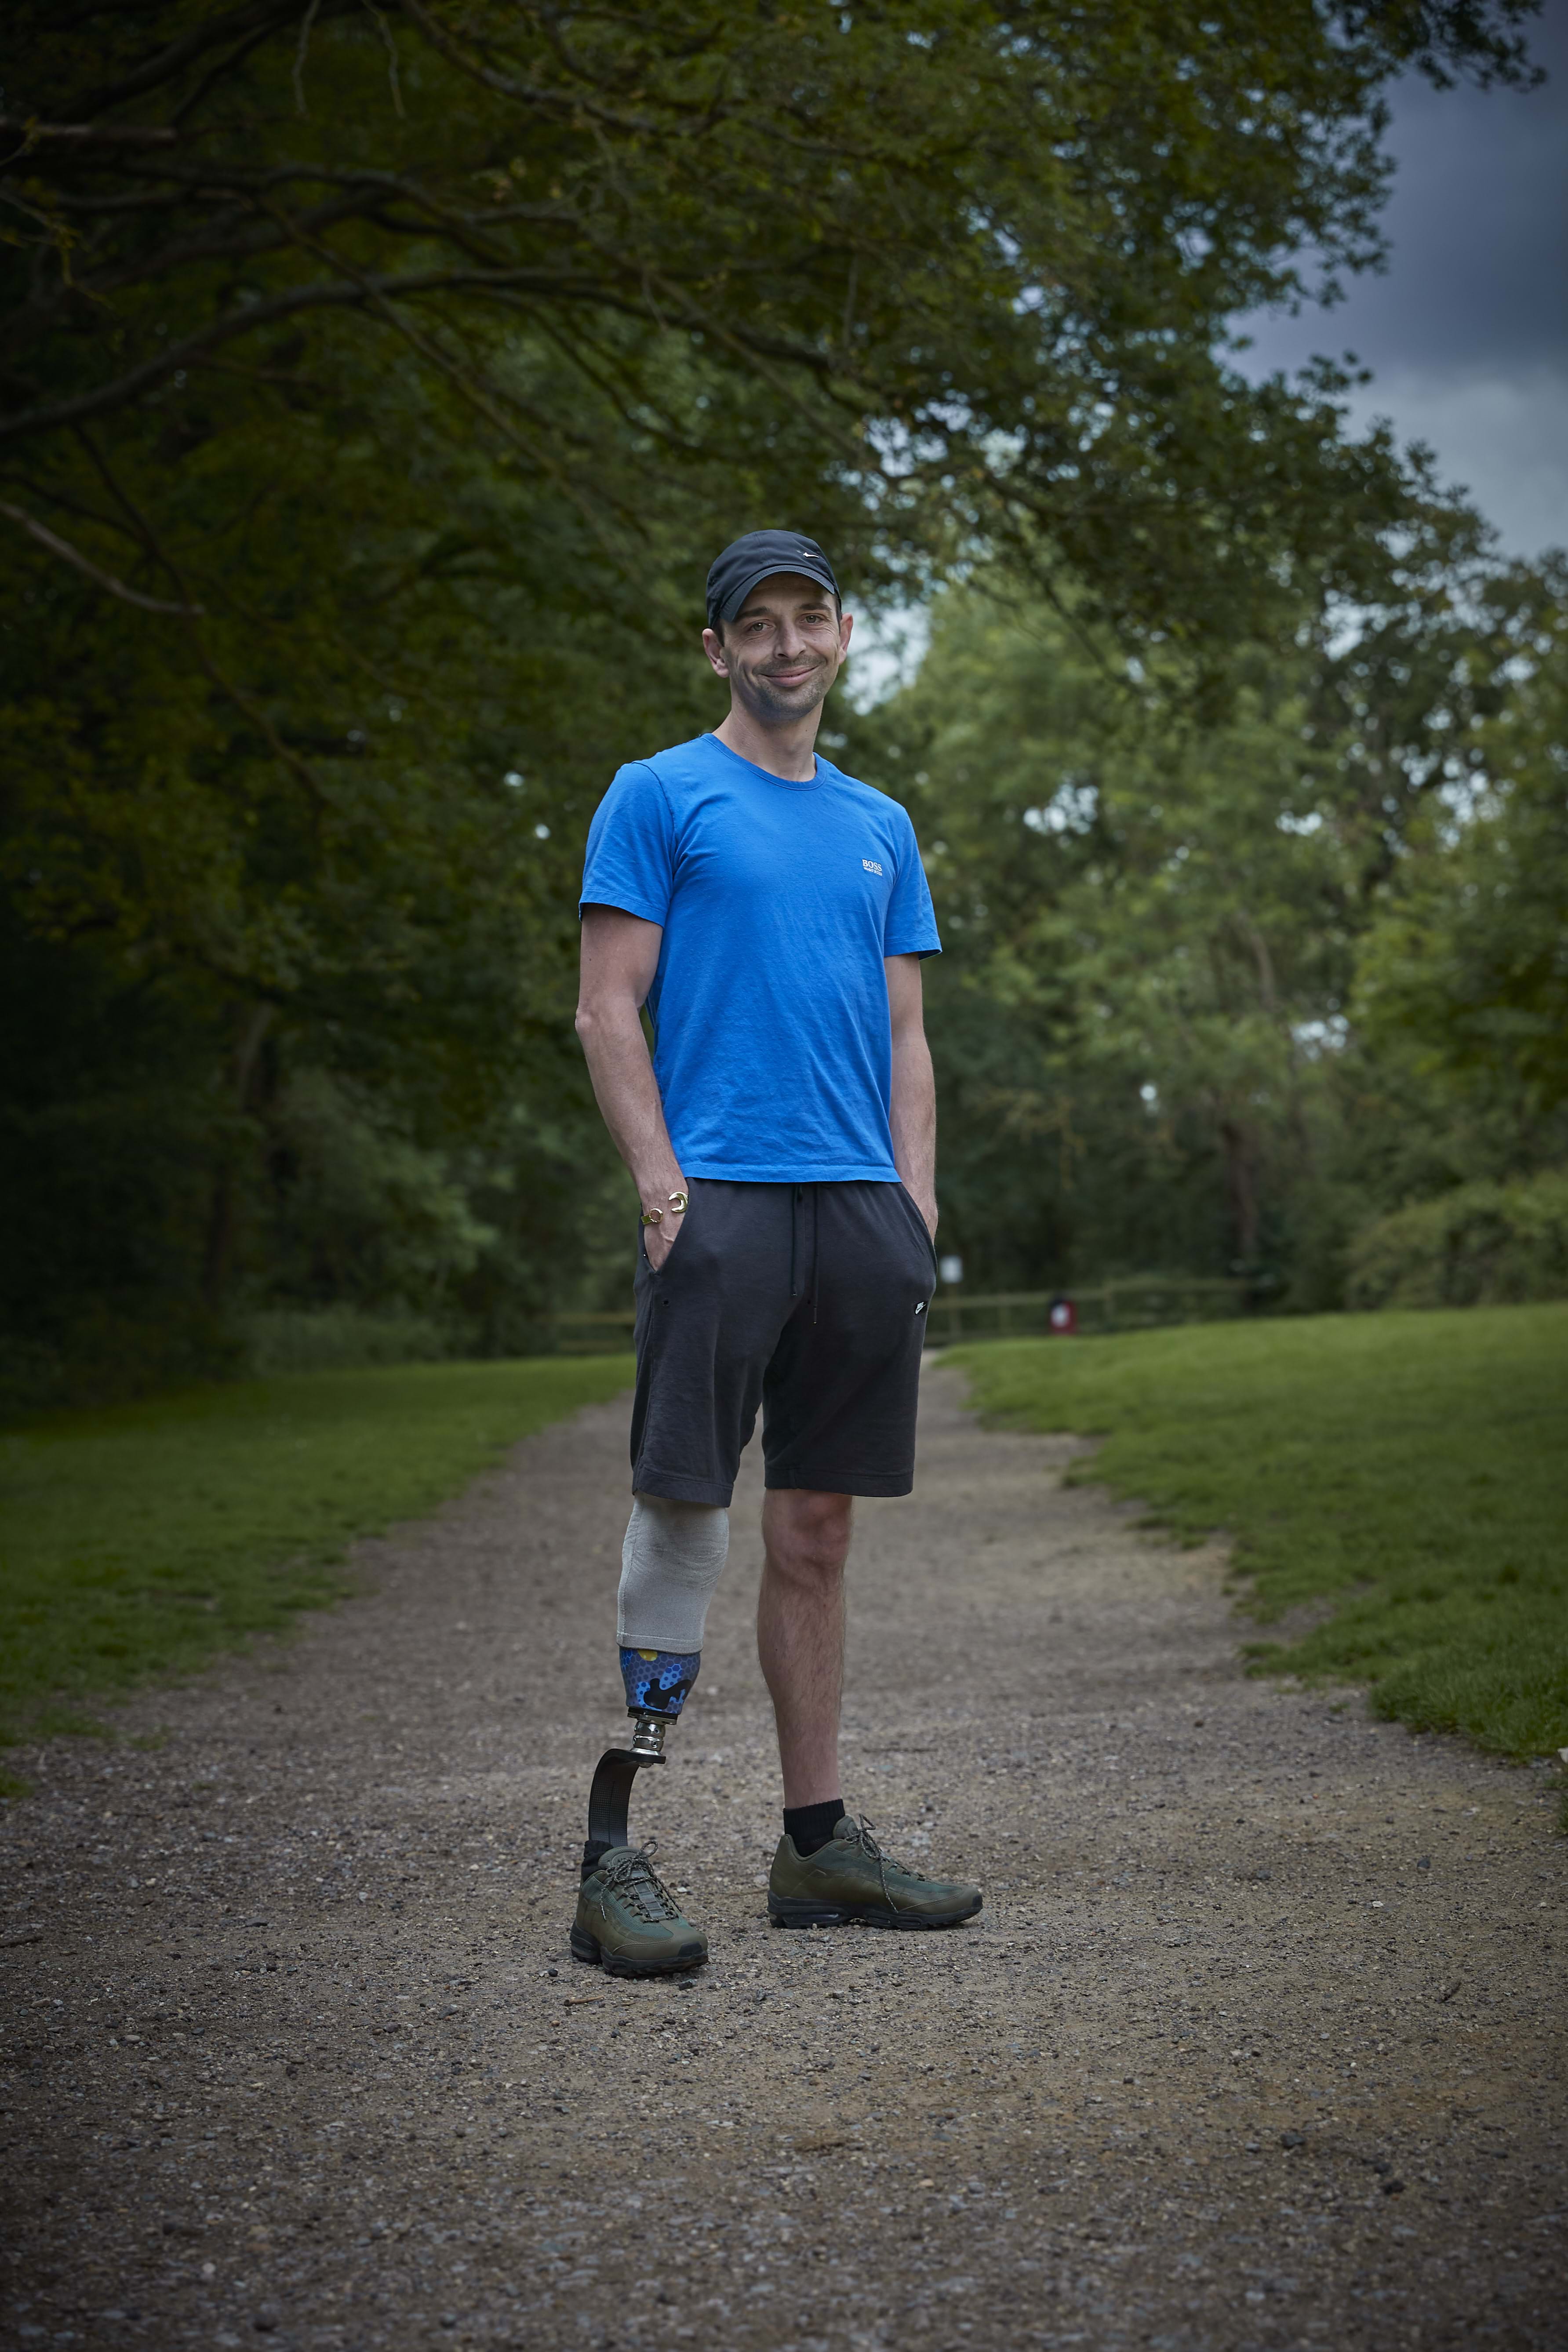 A man stood in a park with a prosthetic leg